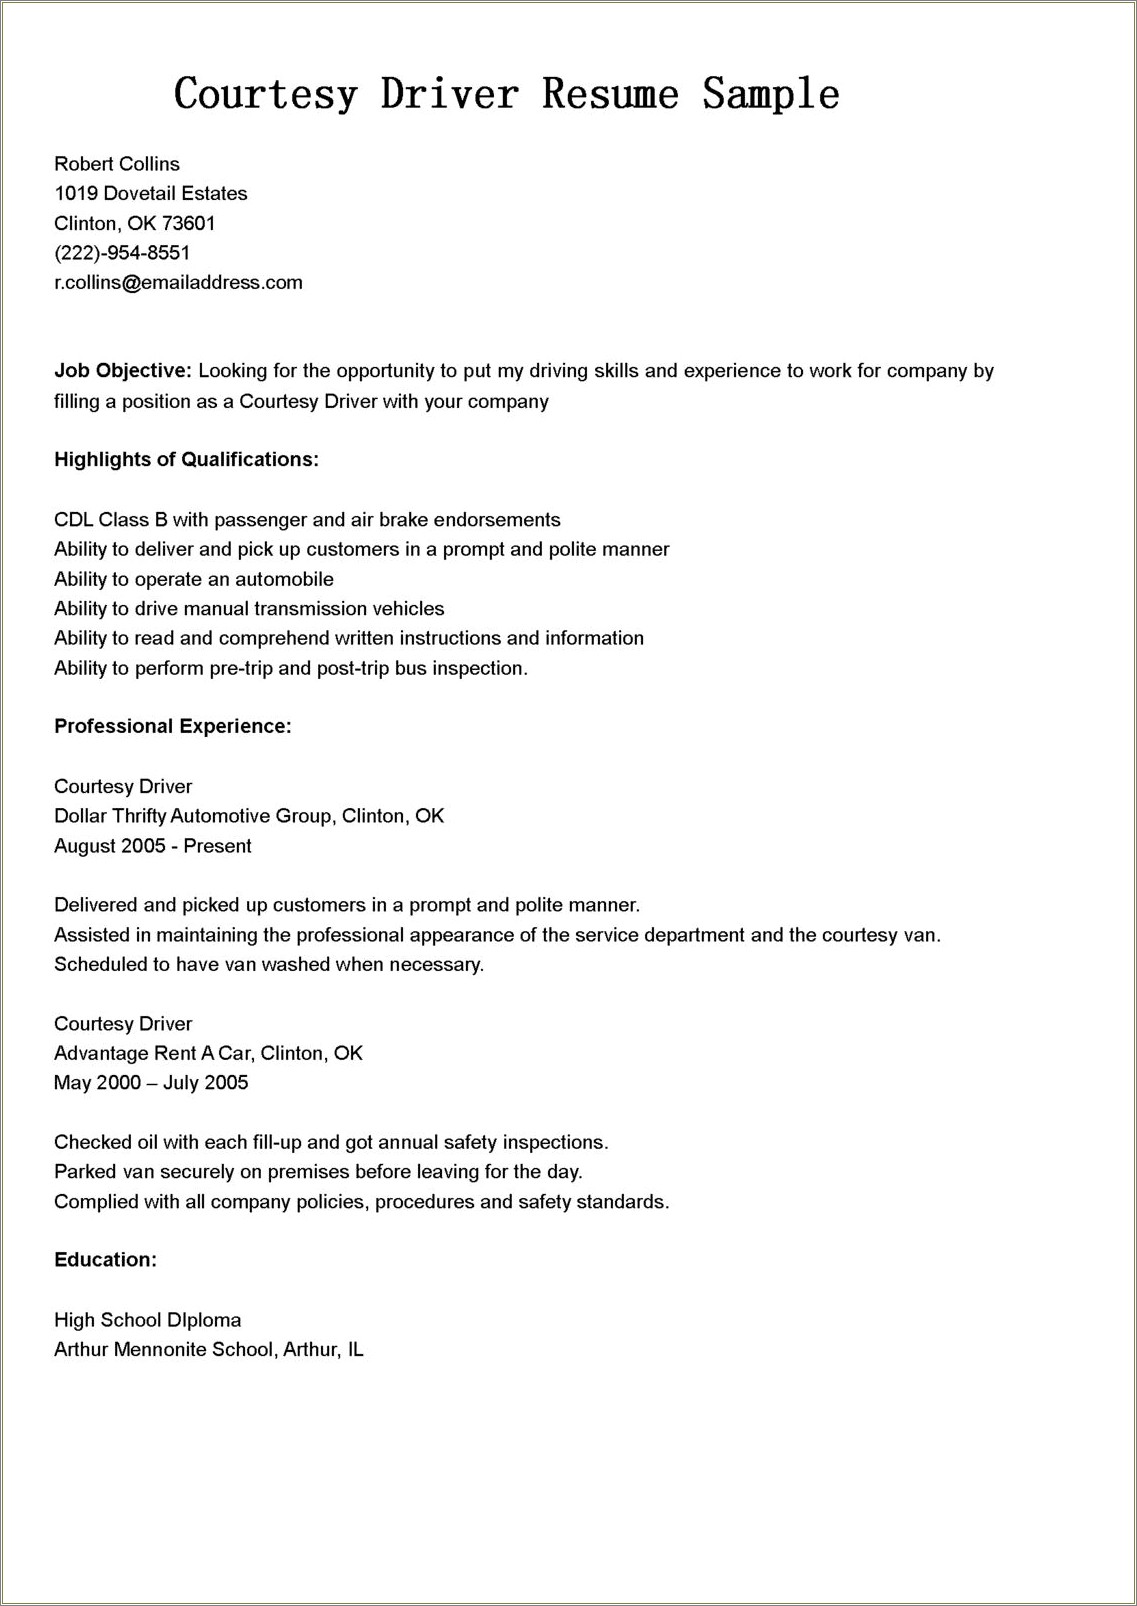 Where To Put Driving Skills In Resume